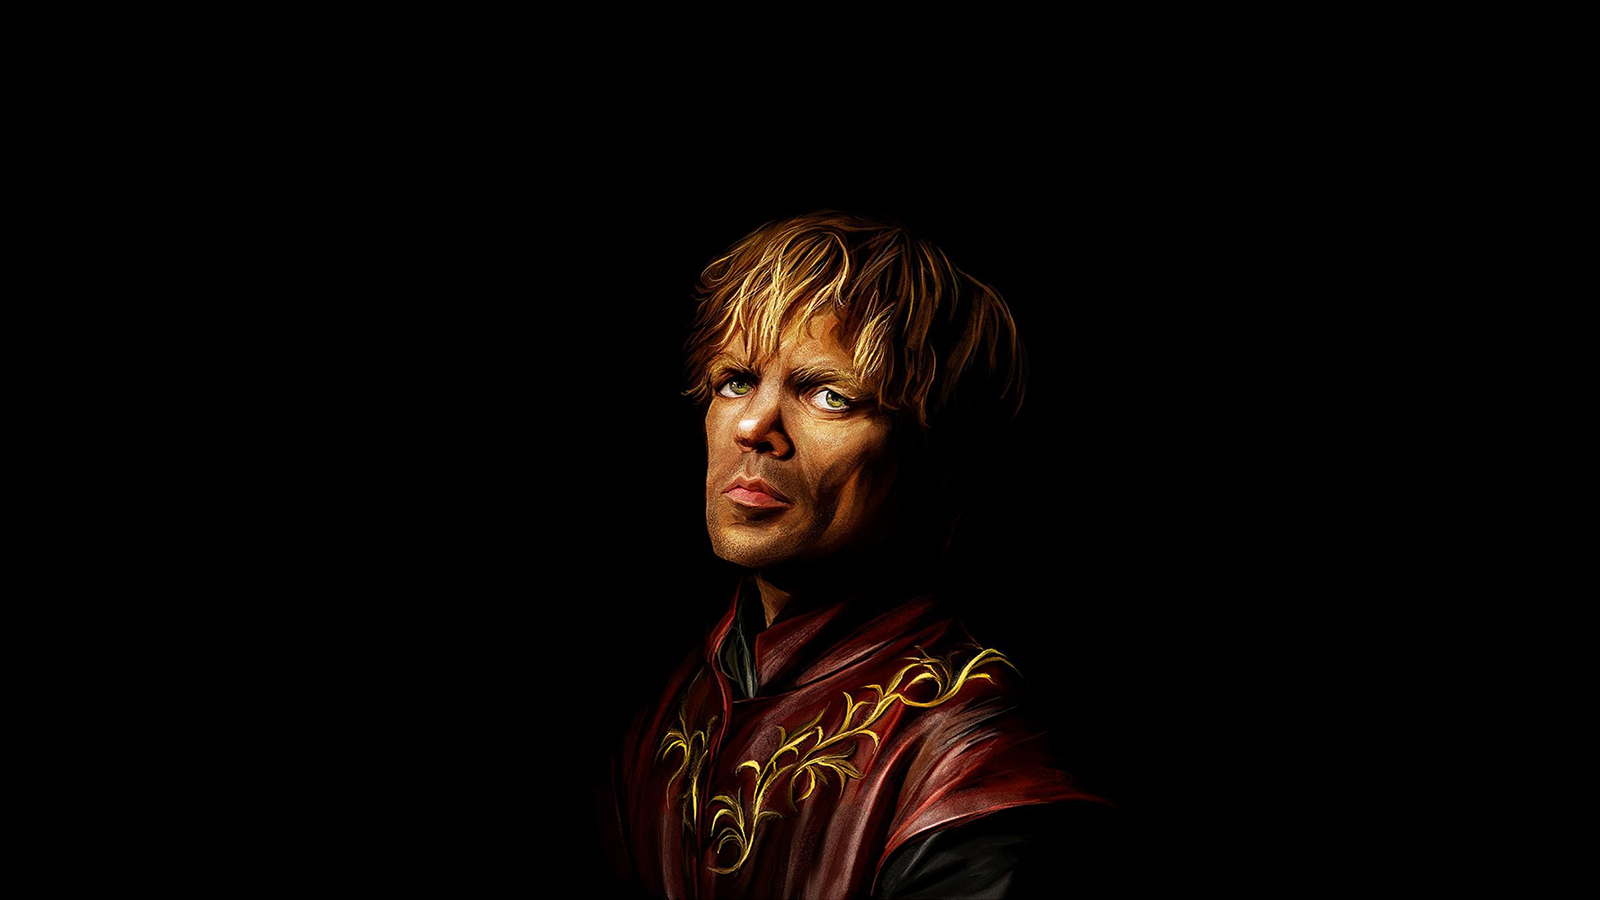  Thrones Tyrion Lannister The Imp Free Wallpaper For Android Devices